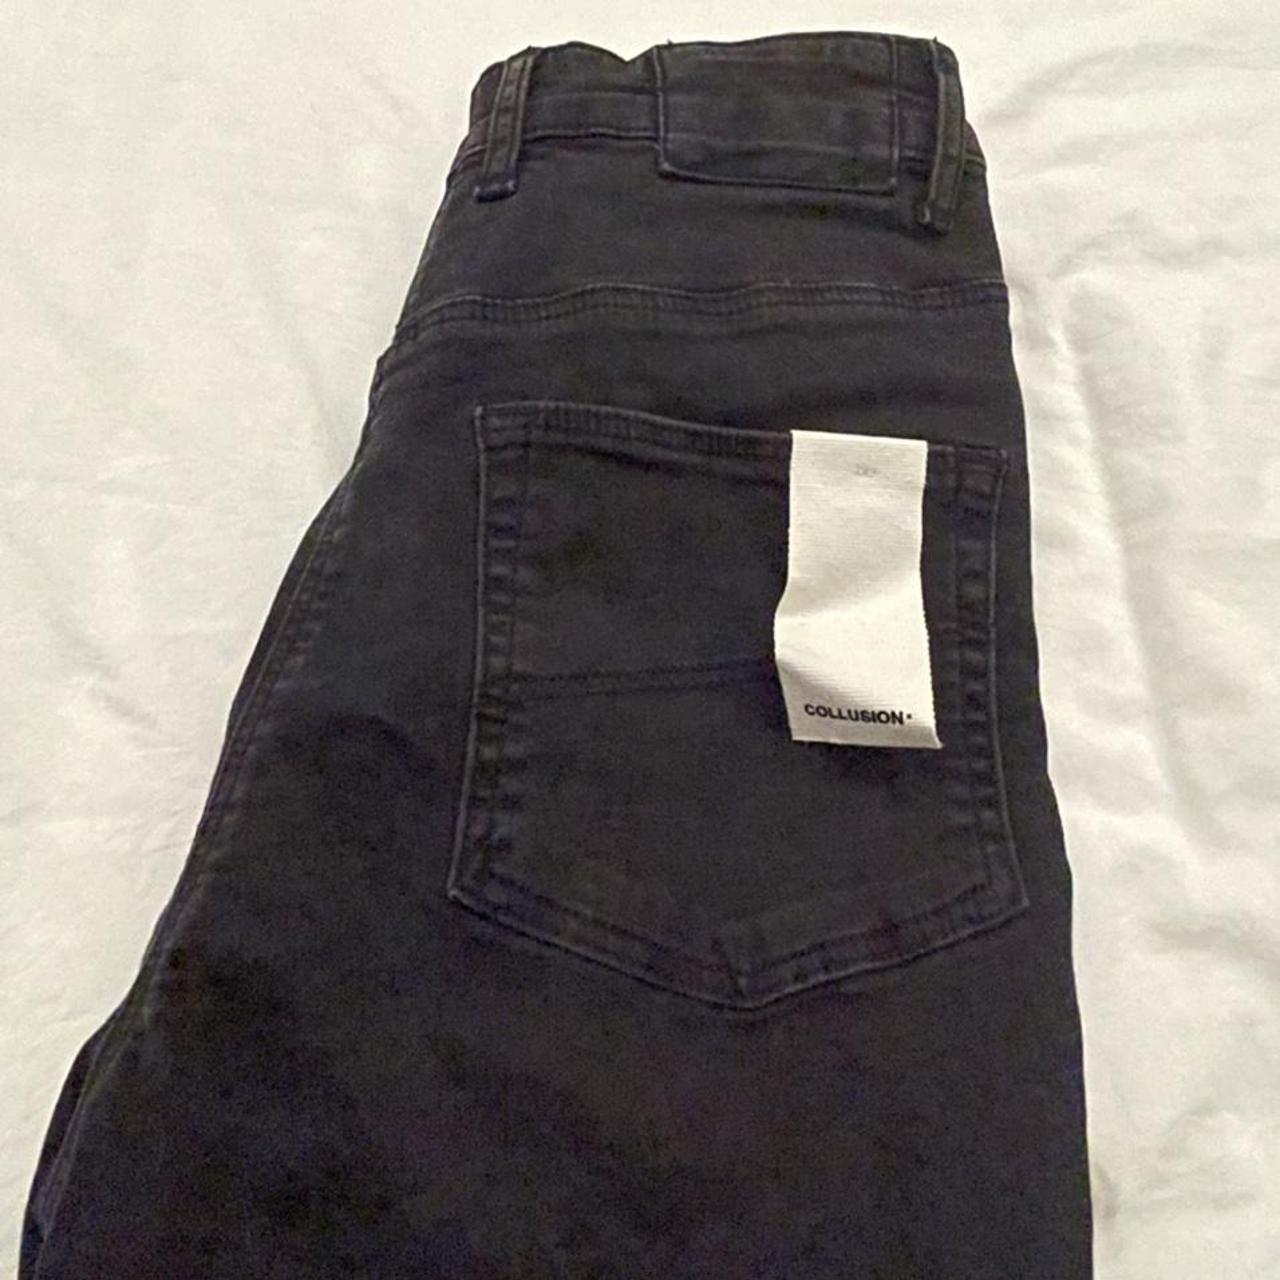 Collusion high rise bootleg jeans! - bought from... - Depop